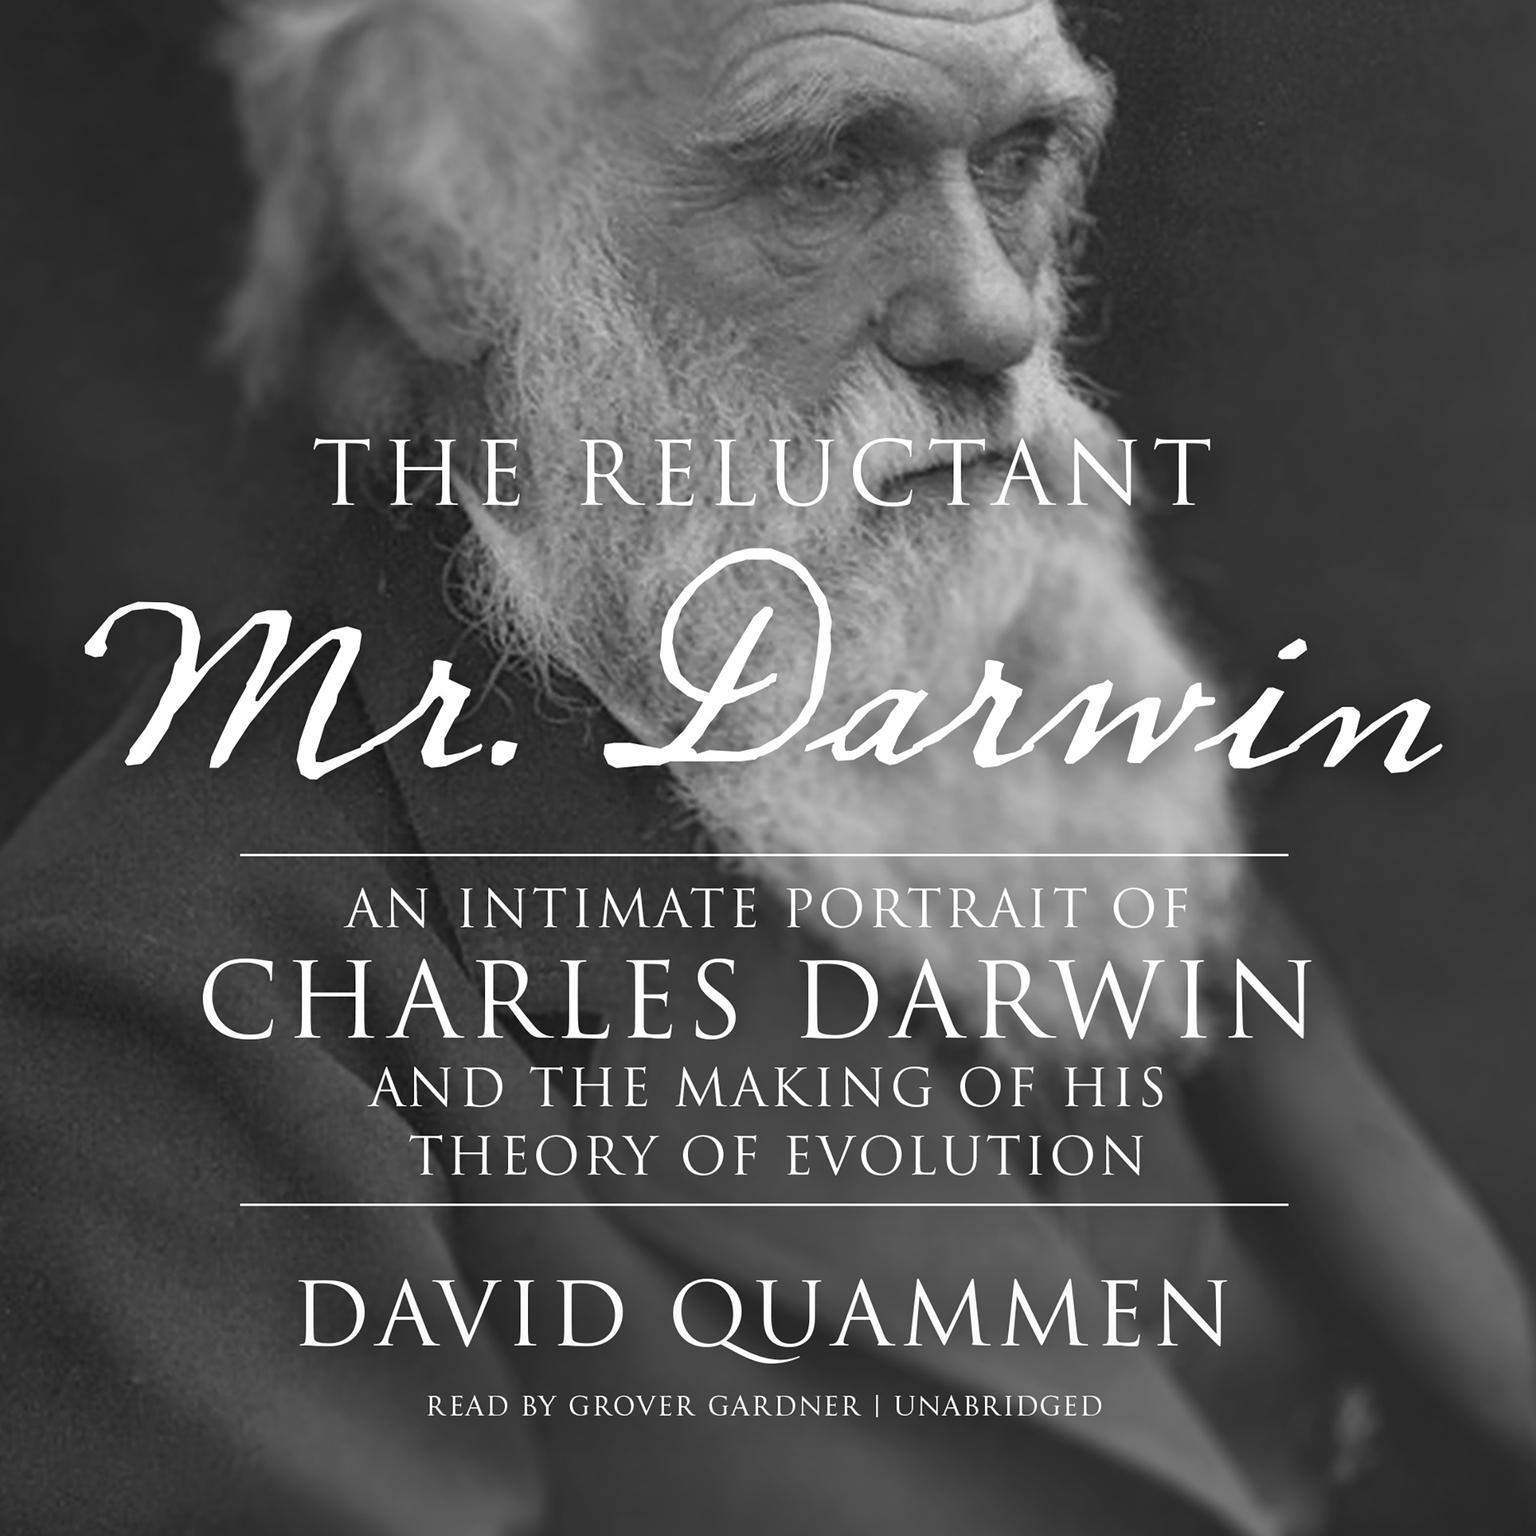 The Reluctant Mr. Darwin: An Intimate Portrait of Charles Darwin and the Making of His Theory of Evolution Audiobook, by David Quammen